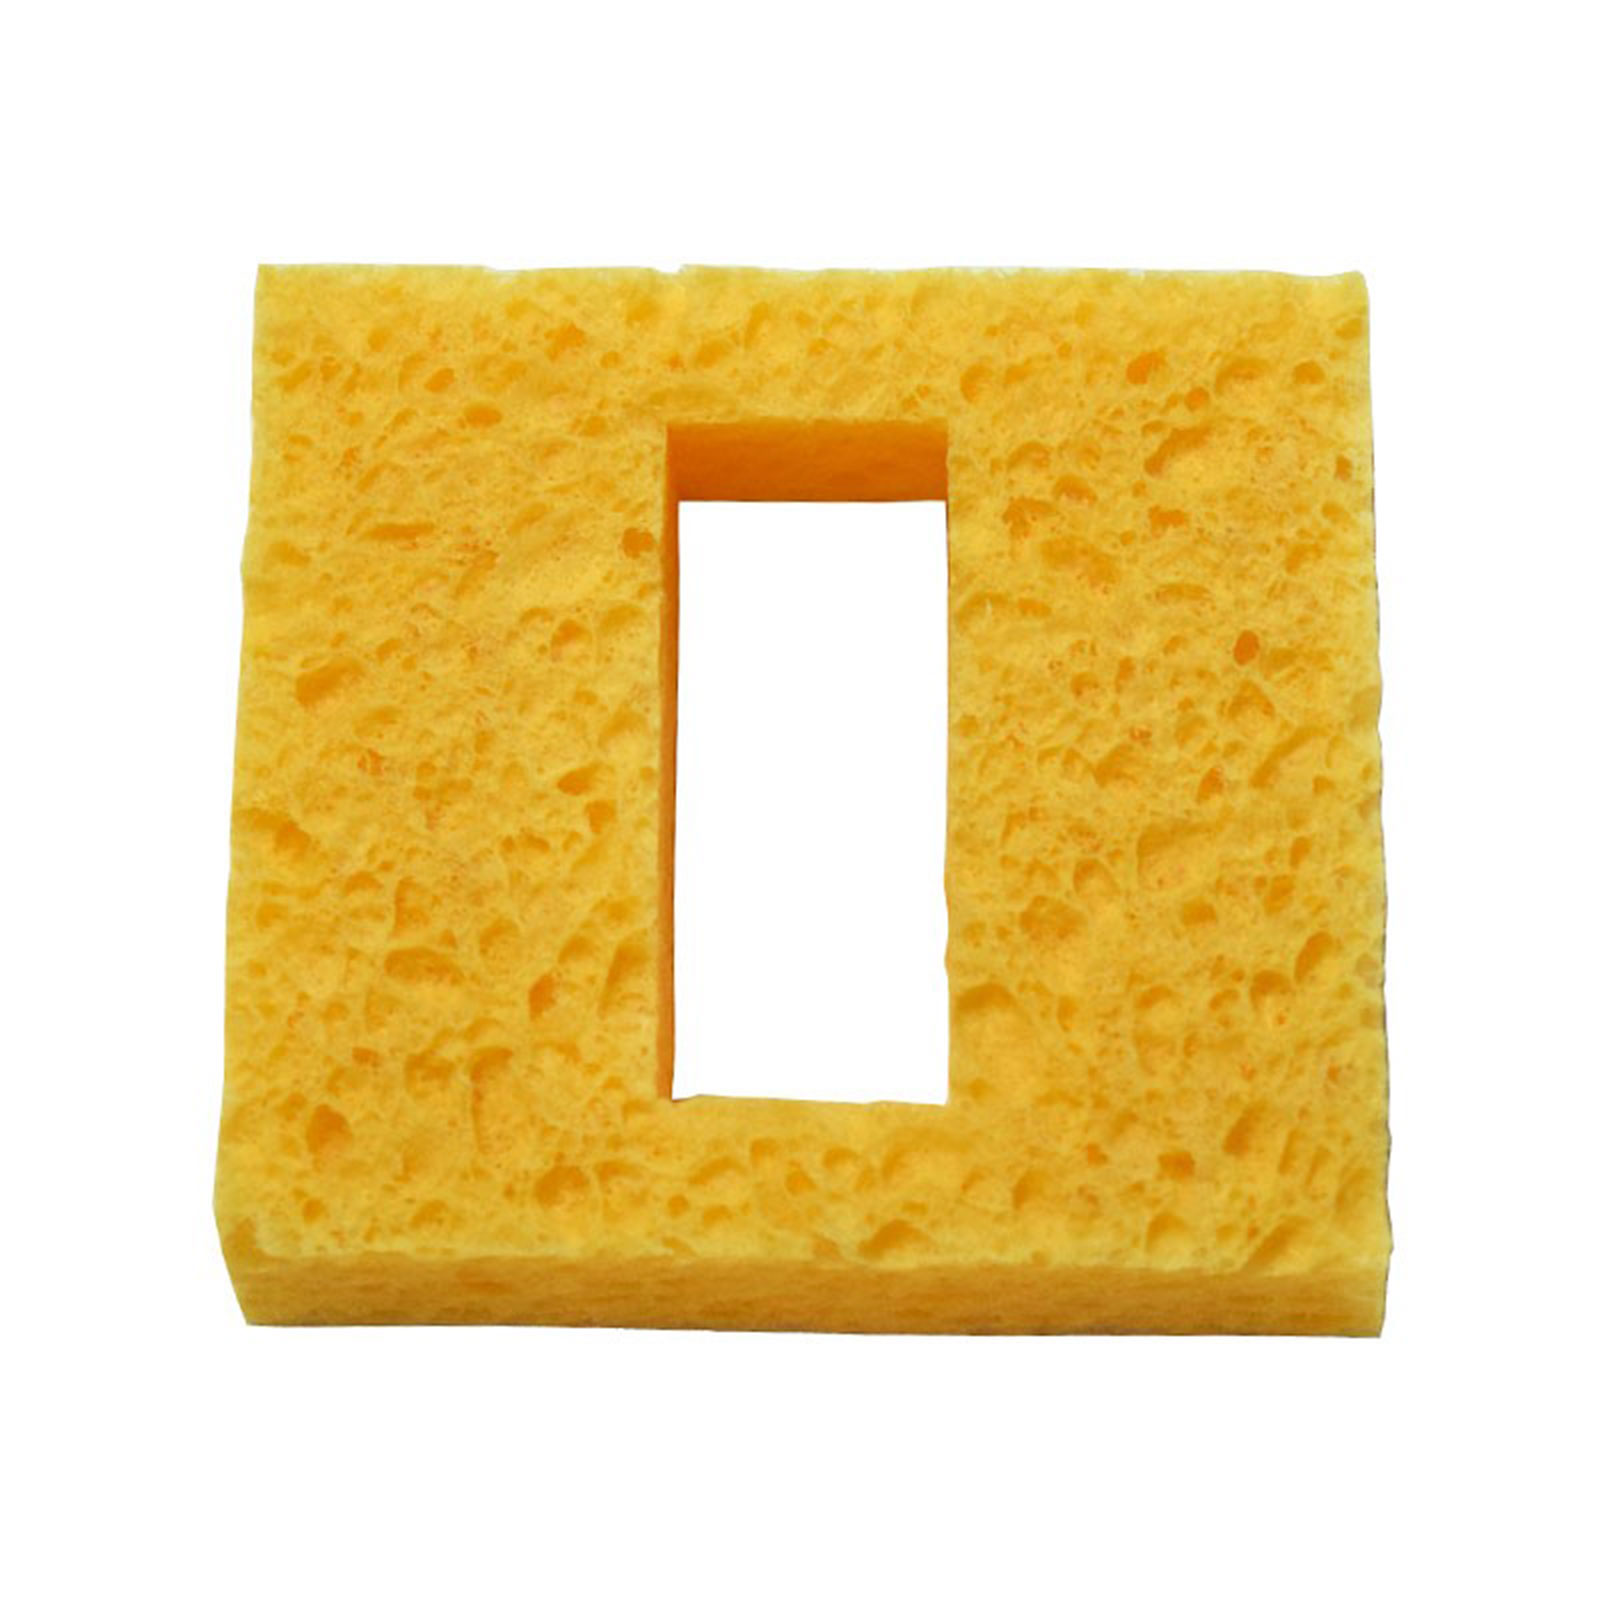 Single Center Hole Solder Sponge For Use With Soldering Irons, Workstands 2.50